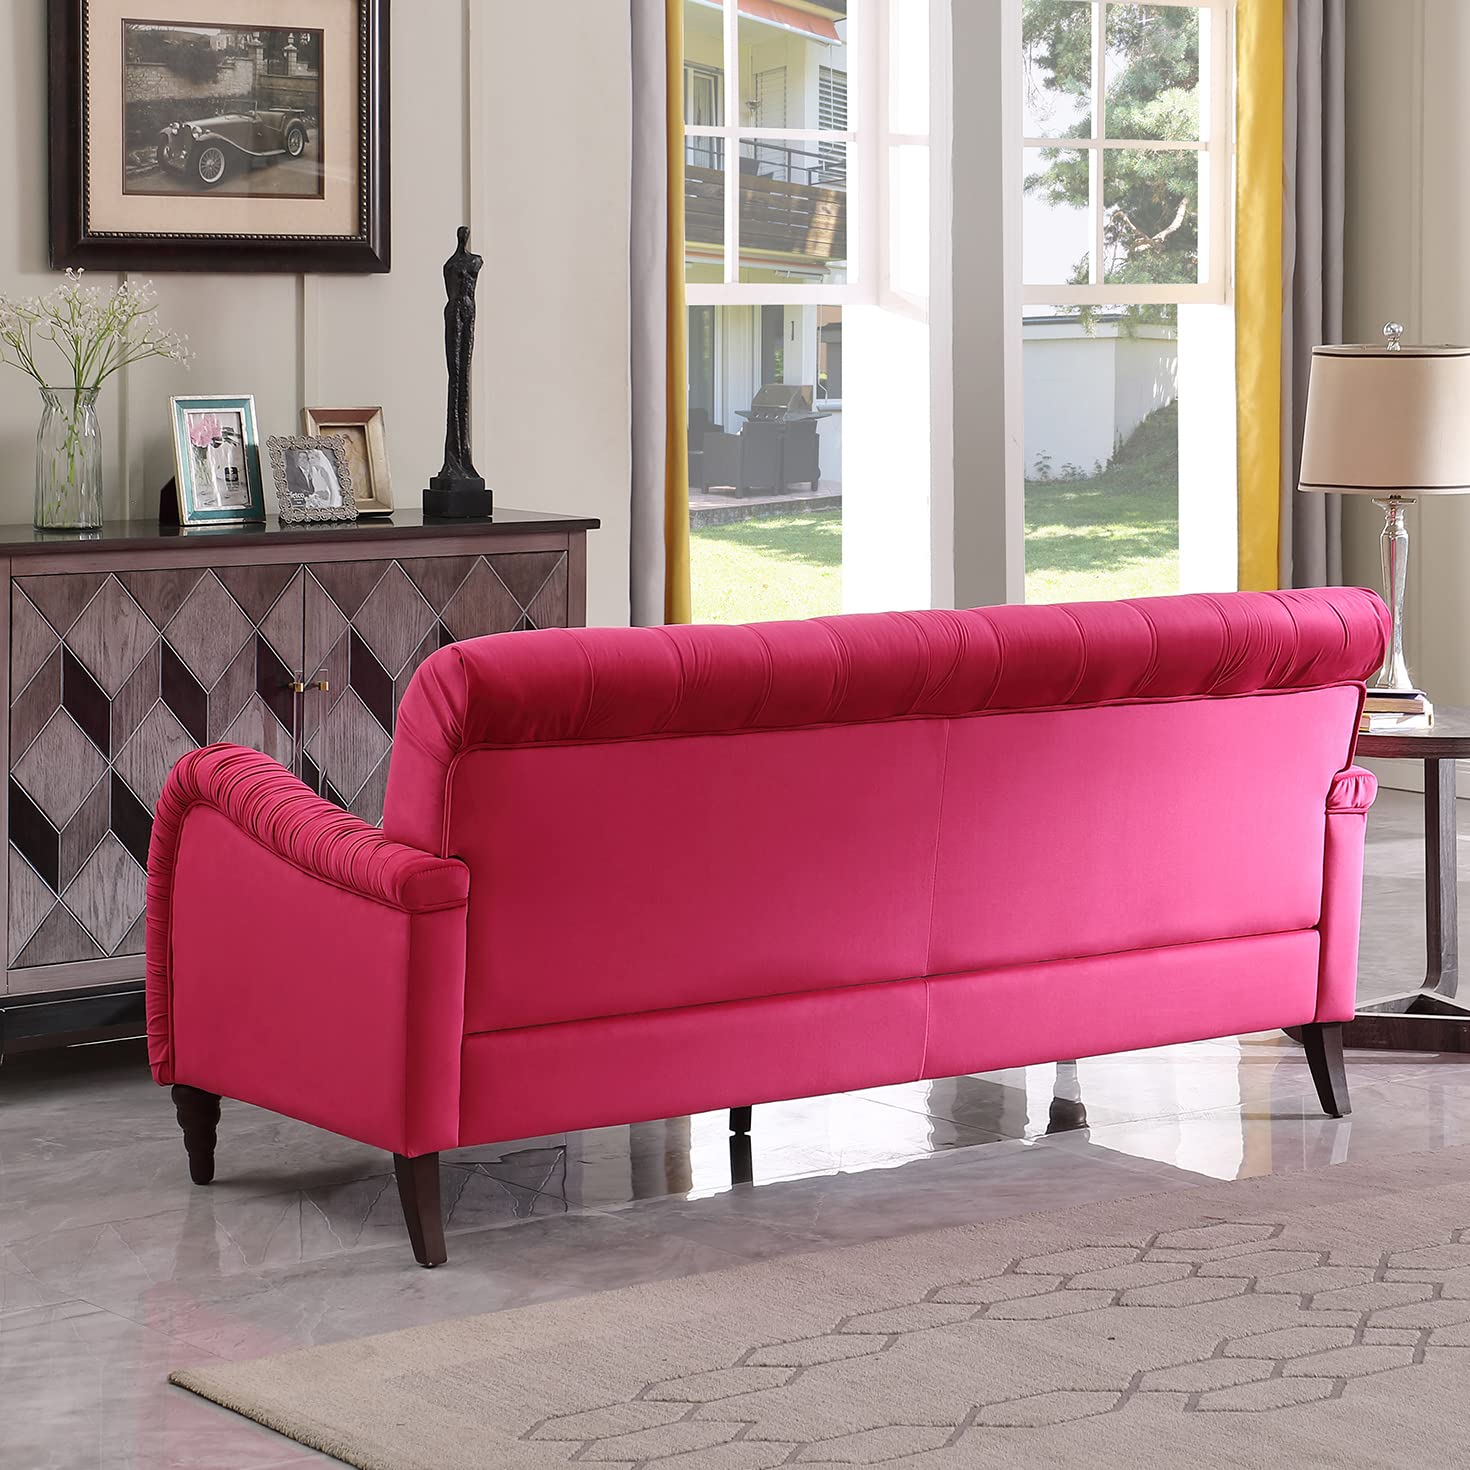 Melpomene Chesterfield-Styled 3 Seater Sofa Couch, Modern 72" Velvet Sofa with Button Tufting, Unique Arm and Wood Legs,Rose Red